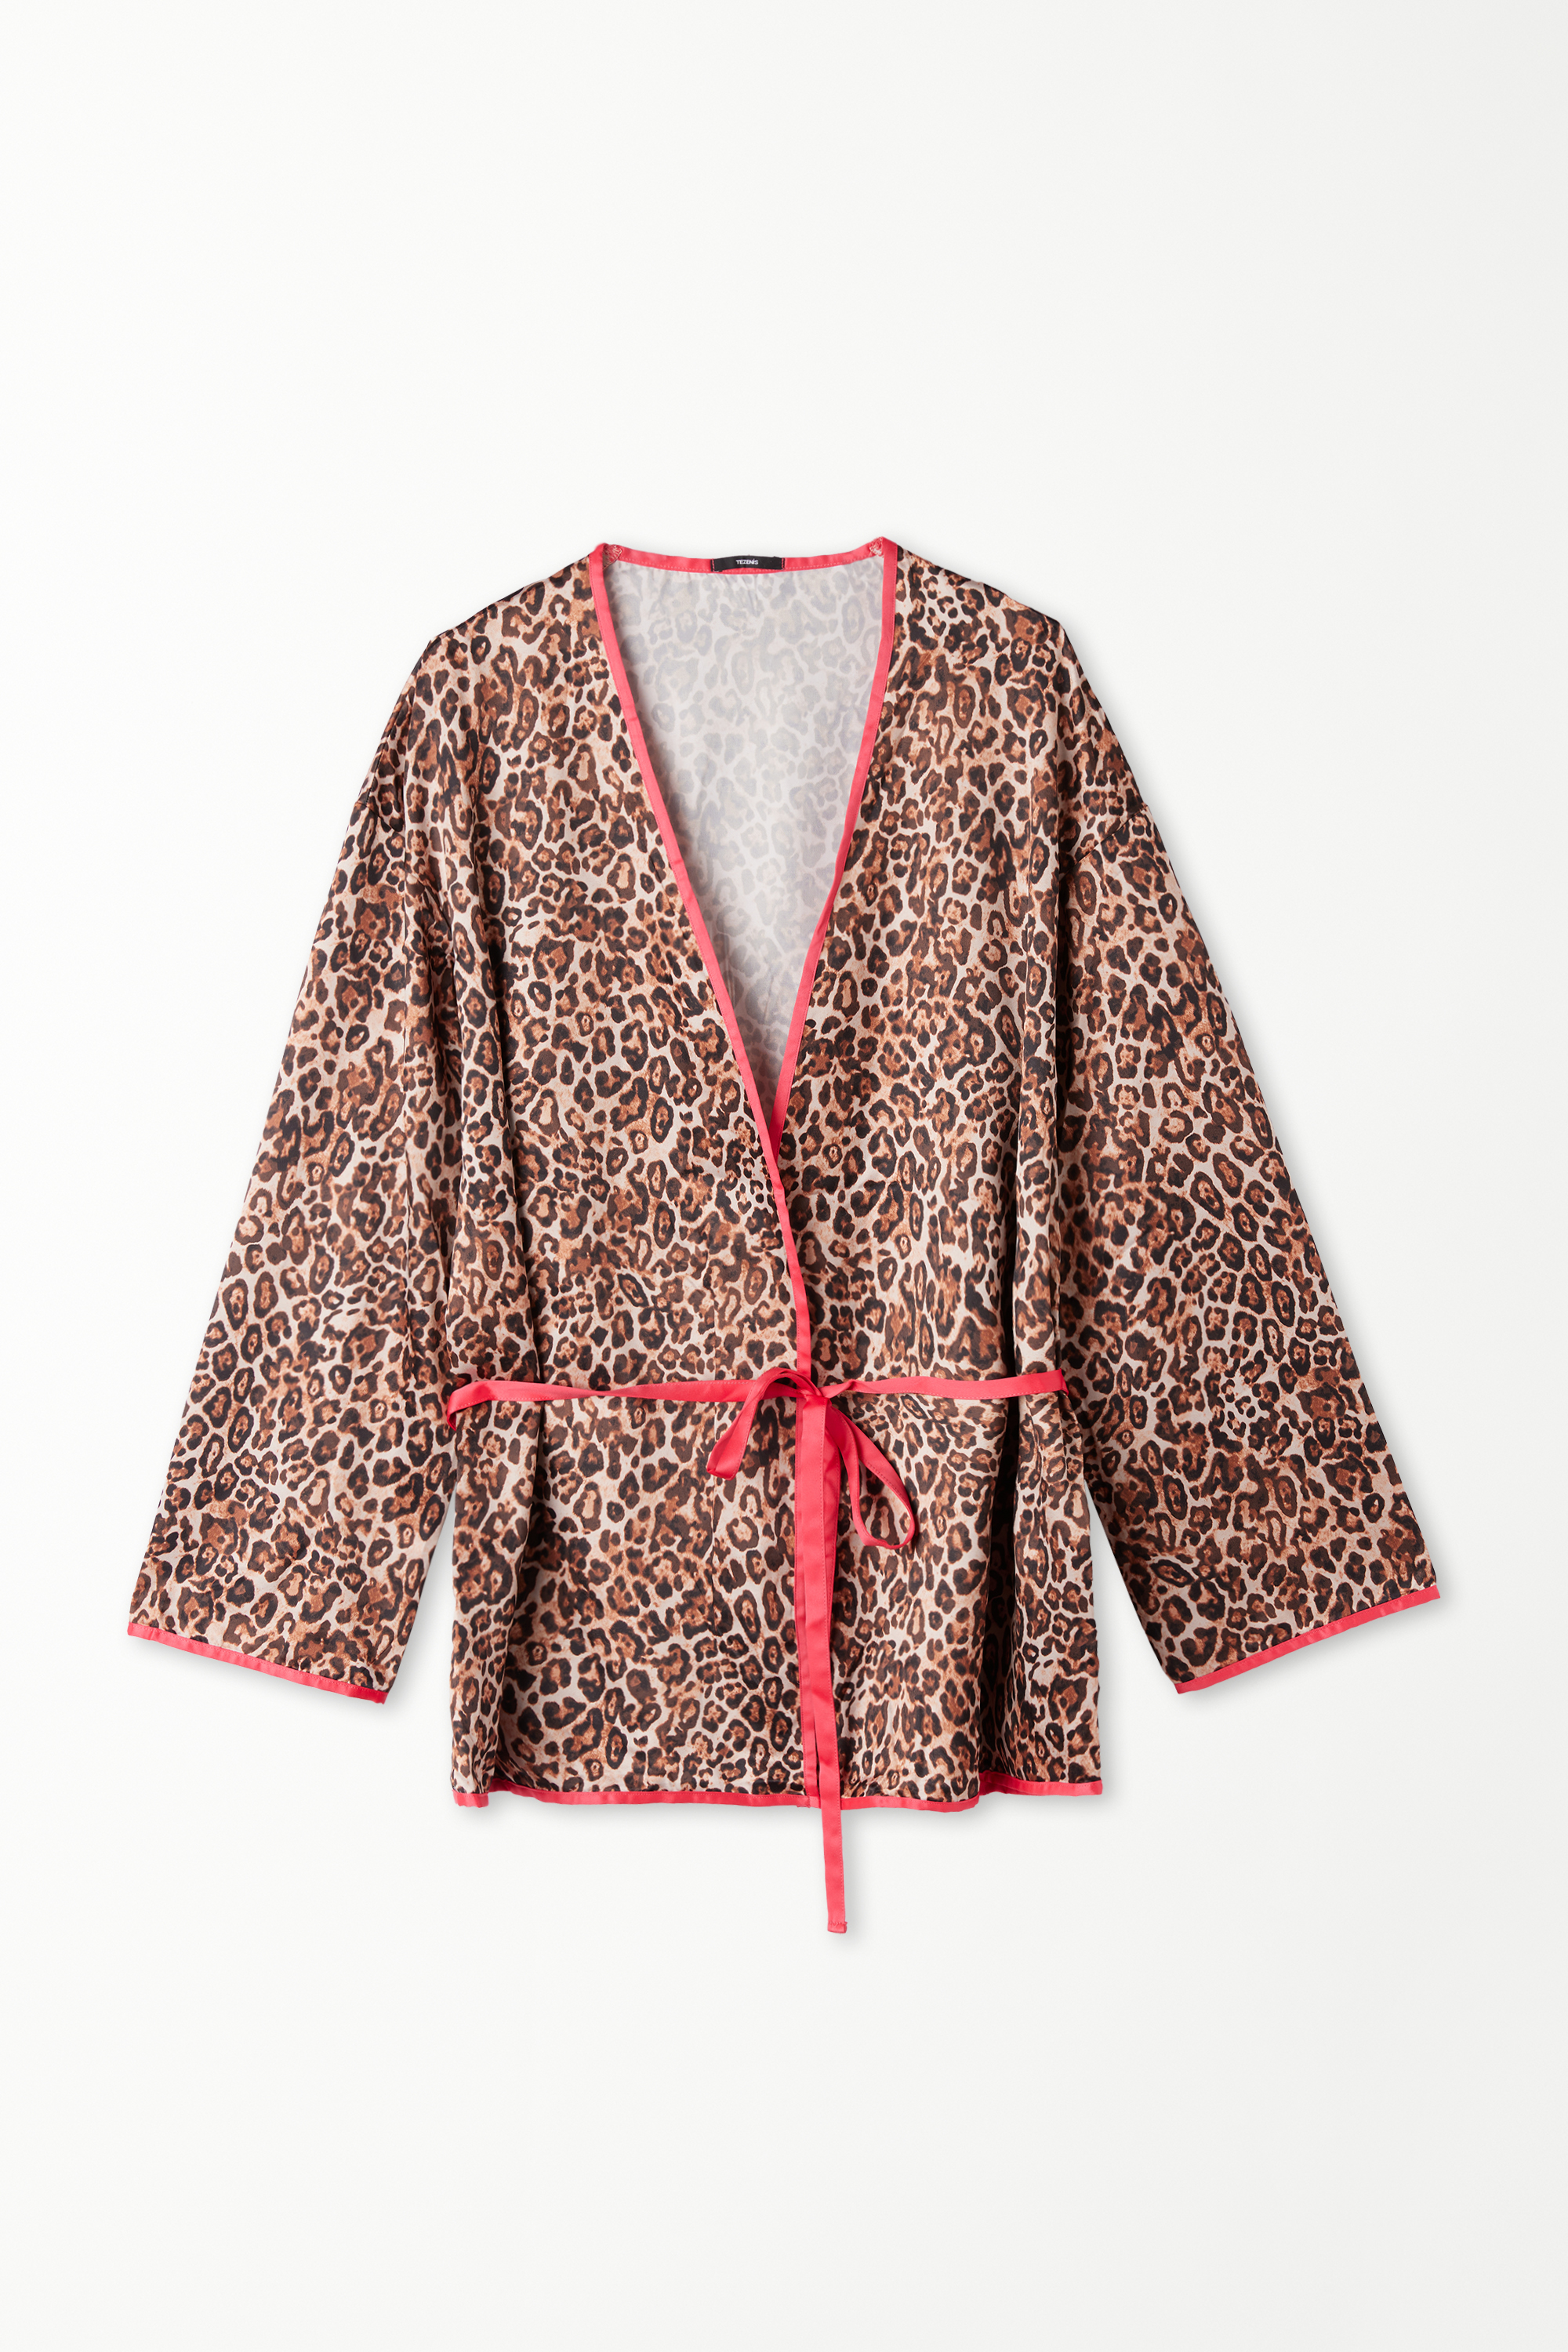 Strawberry Leopard Long-Sleeved Short Robe with Sash